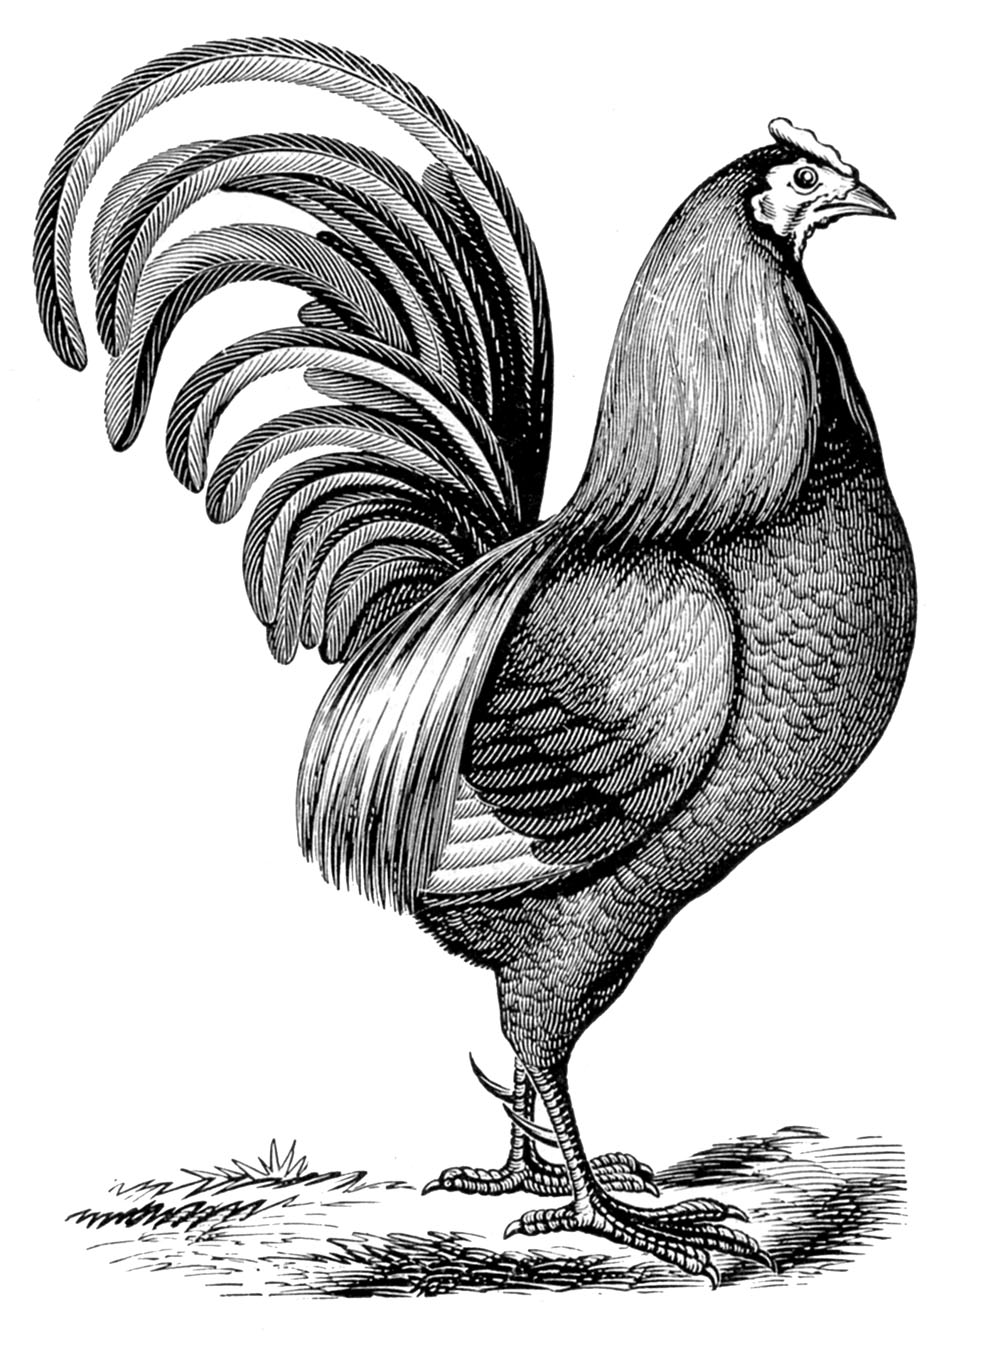 Vintage Clip Art - Chicken with Fancy Tail - The Graphics ...